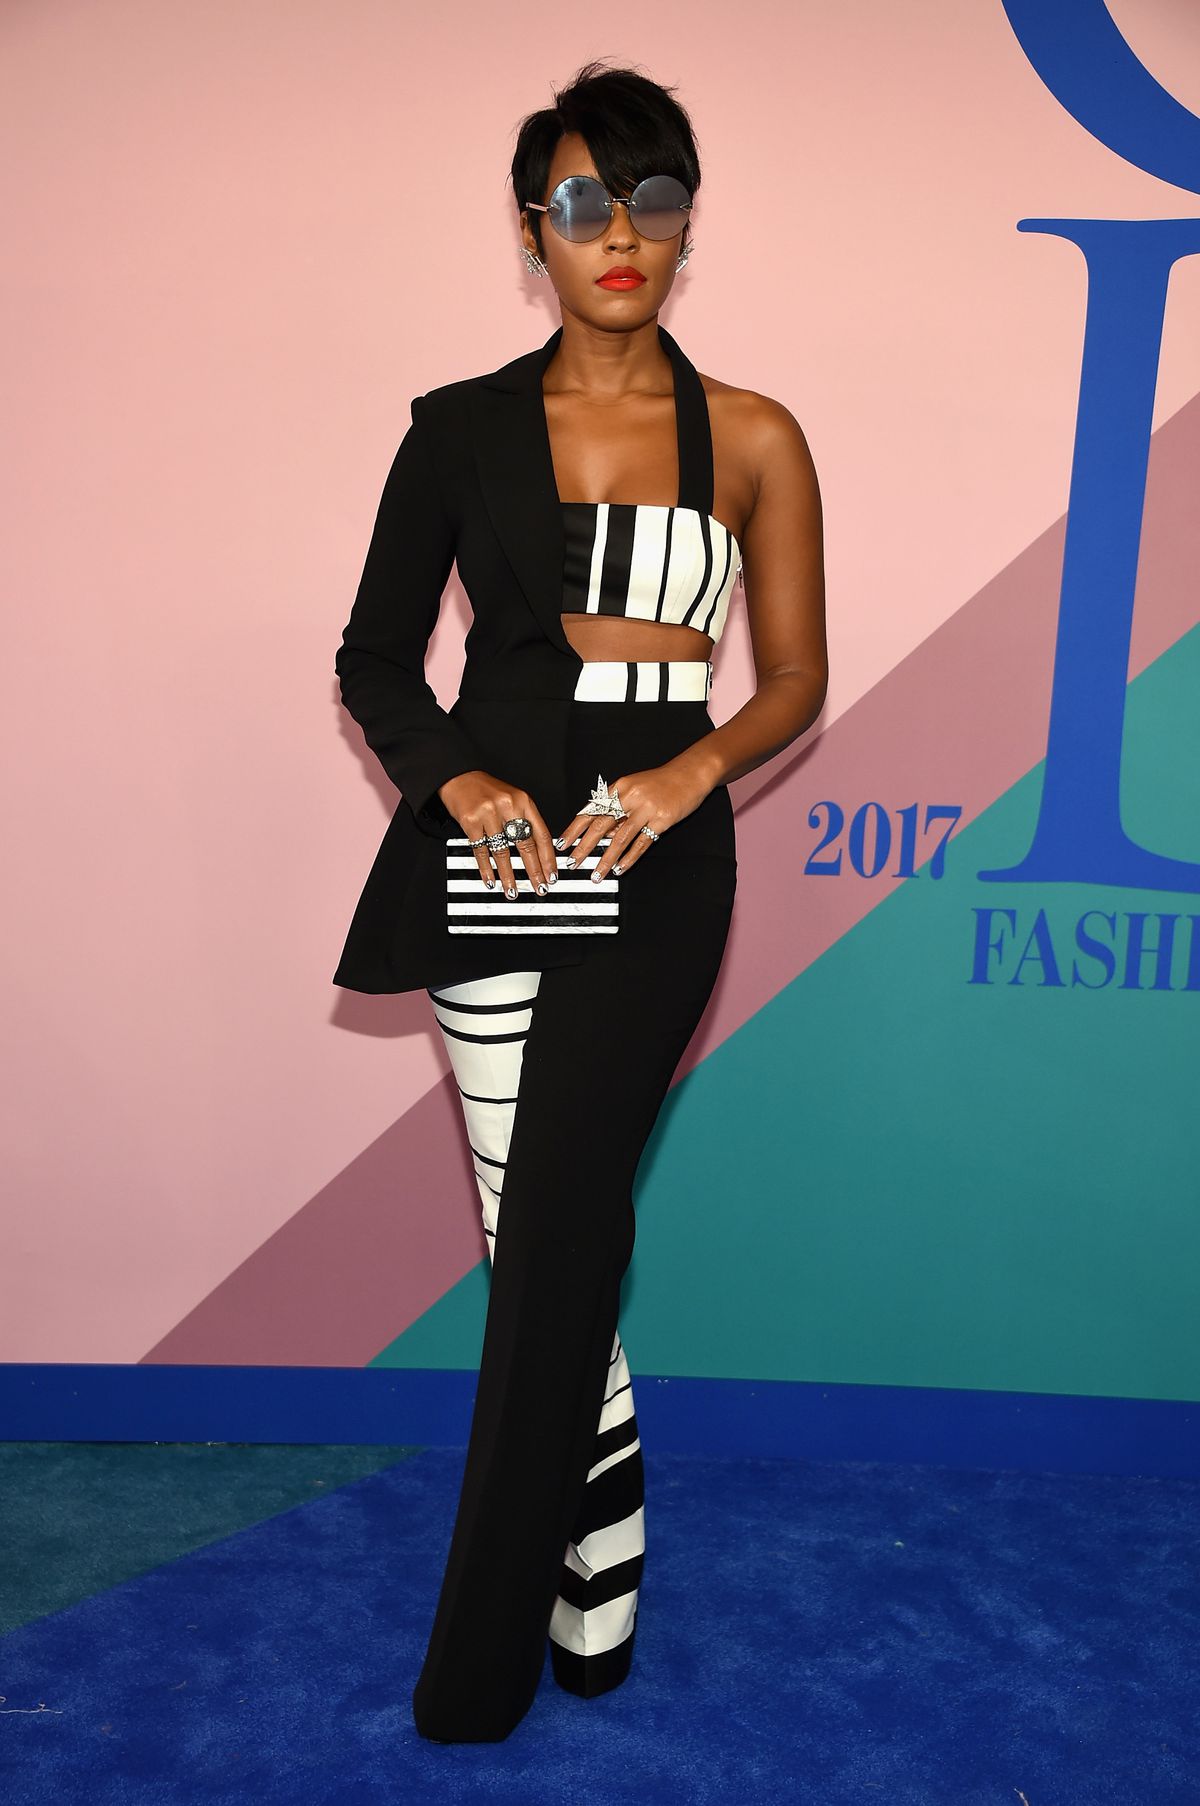 Janelle Monae attends the 2017 CFDA Fashion Awards at Hammerstein Ballroom on June 5, 2017 in New York City.